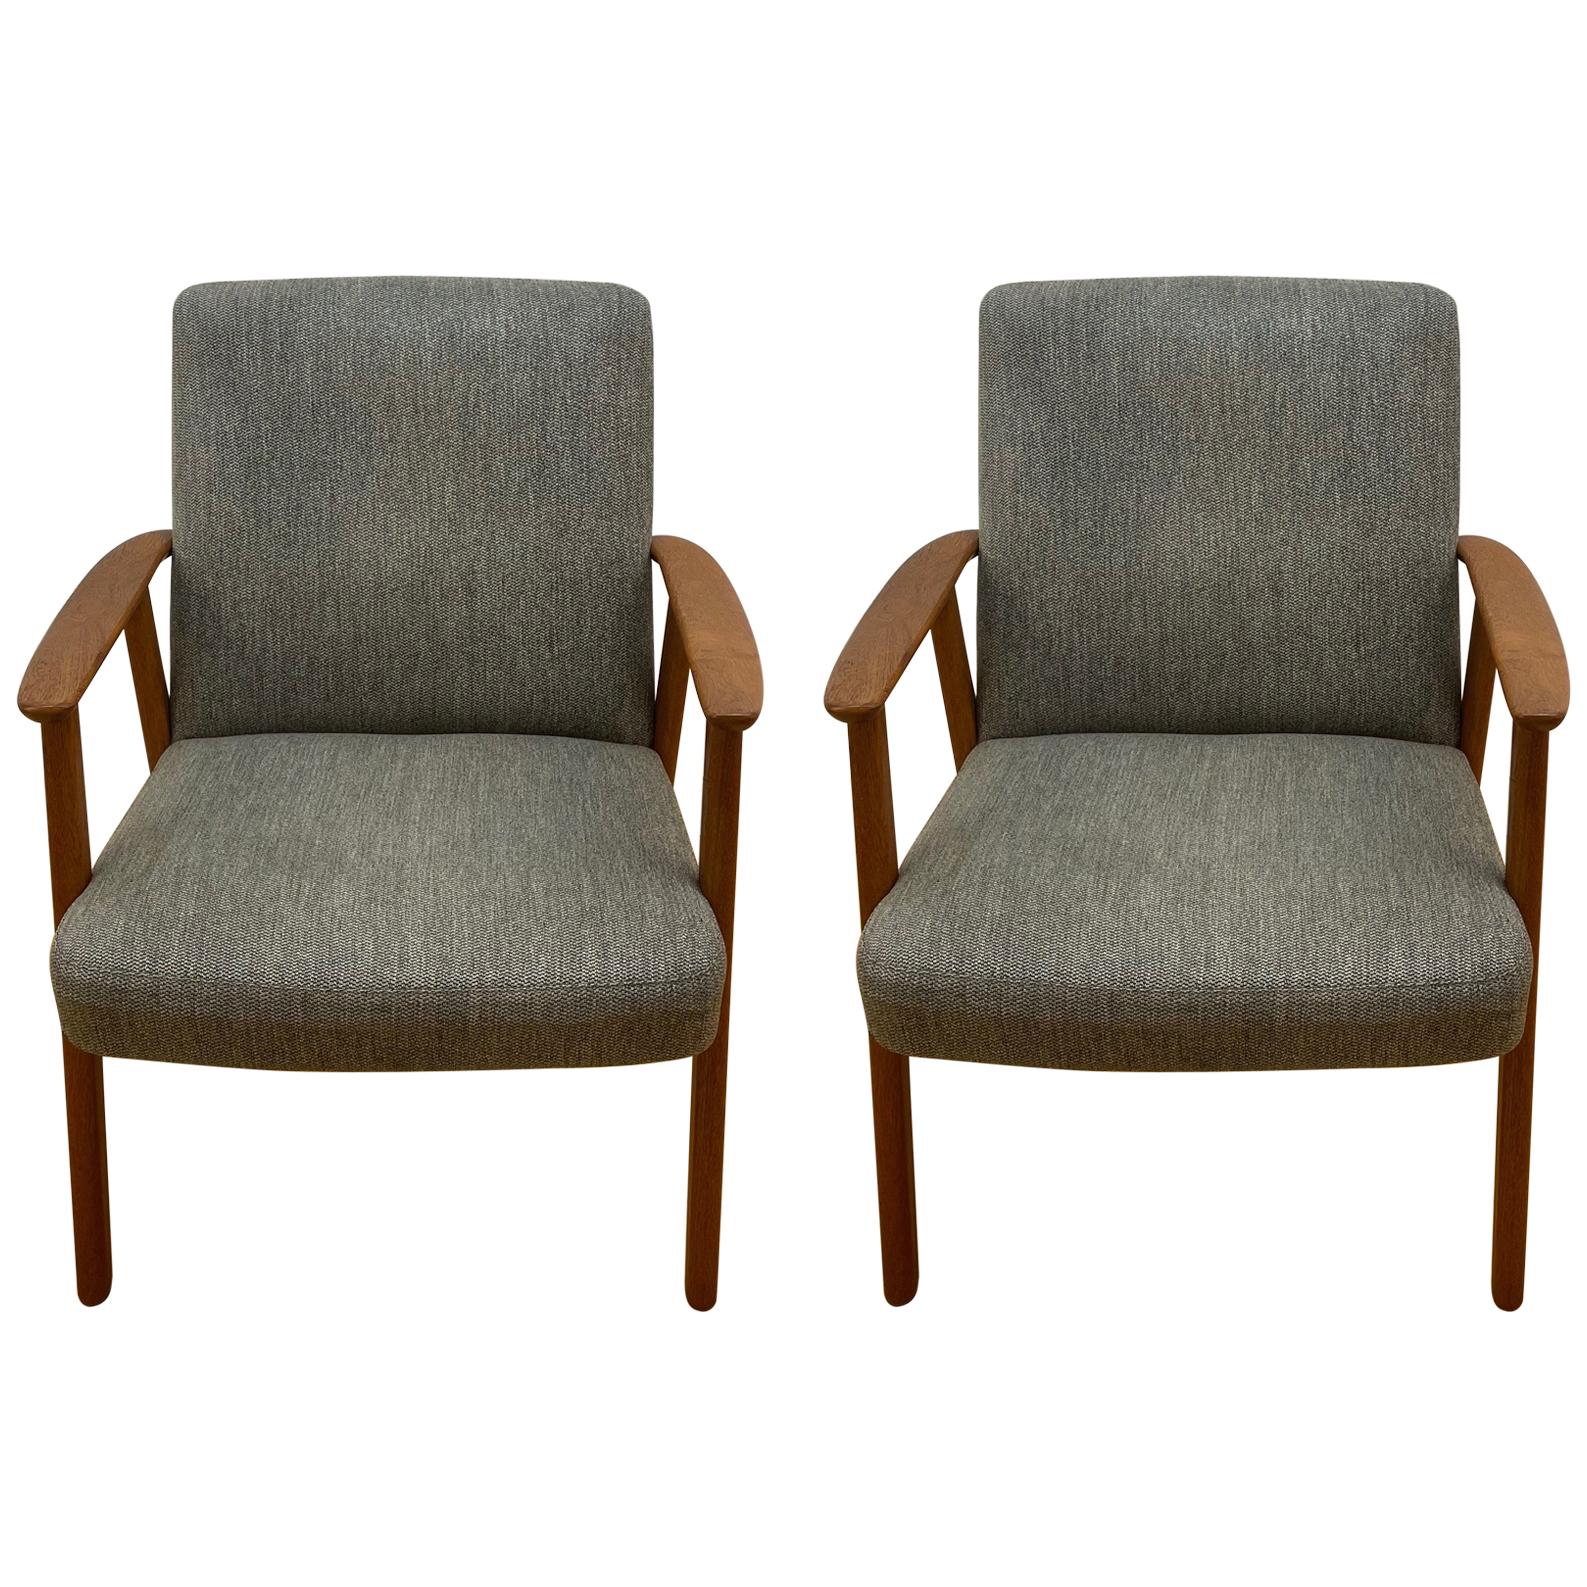 Modern Occasional Chairs, Sweden 1960 For Sale